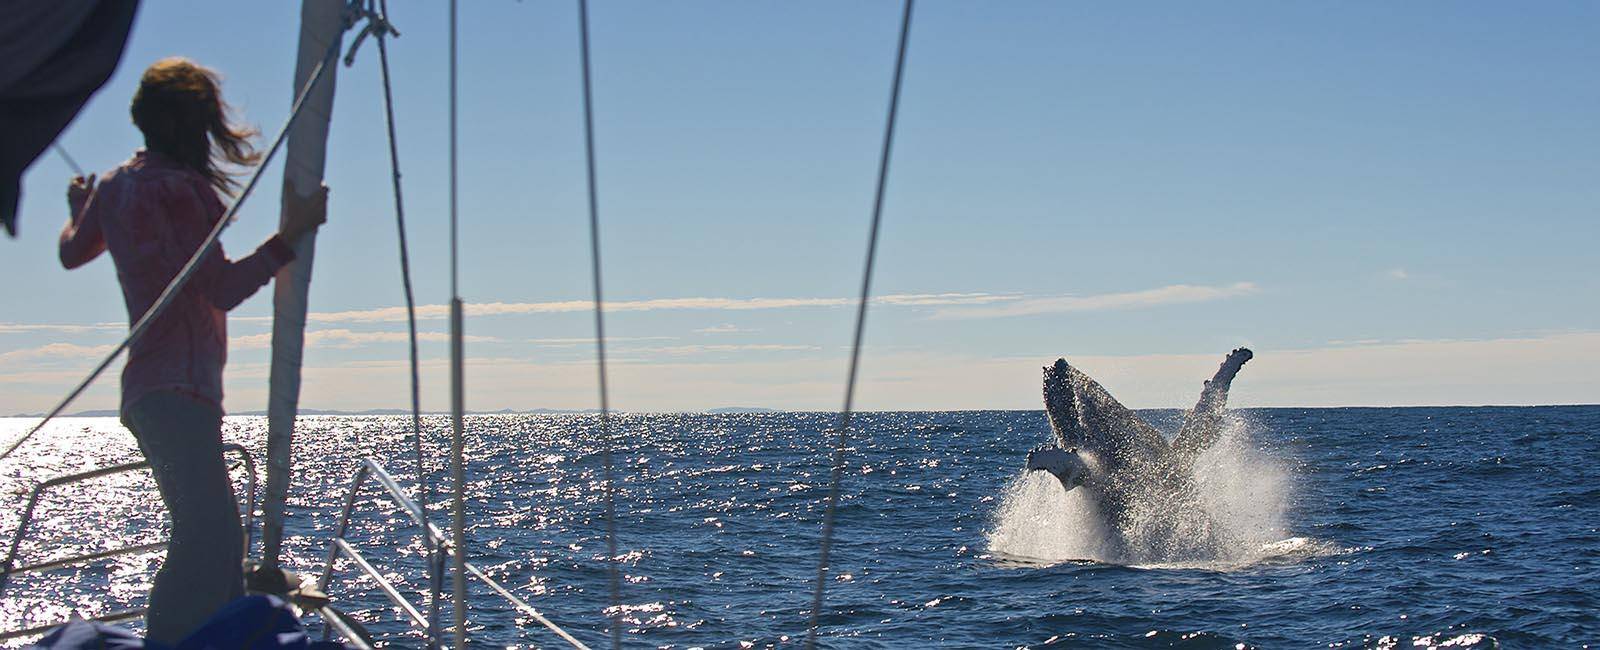 Sailing with whales | Whale watching three ways